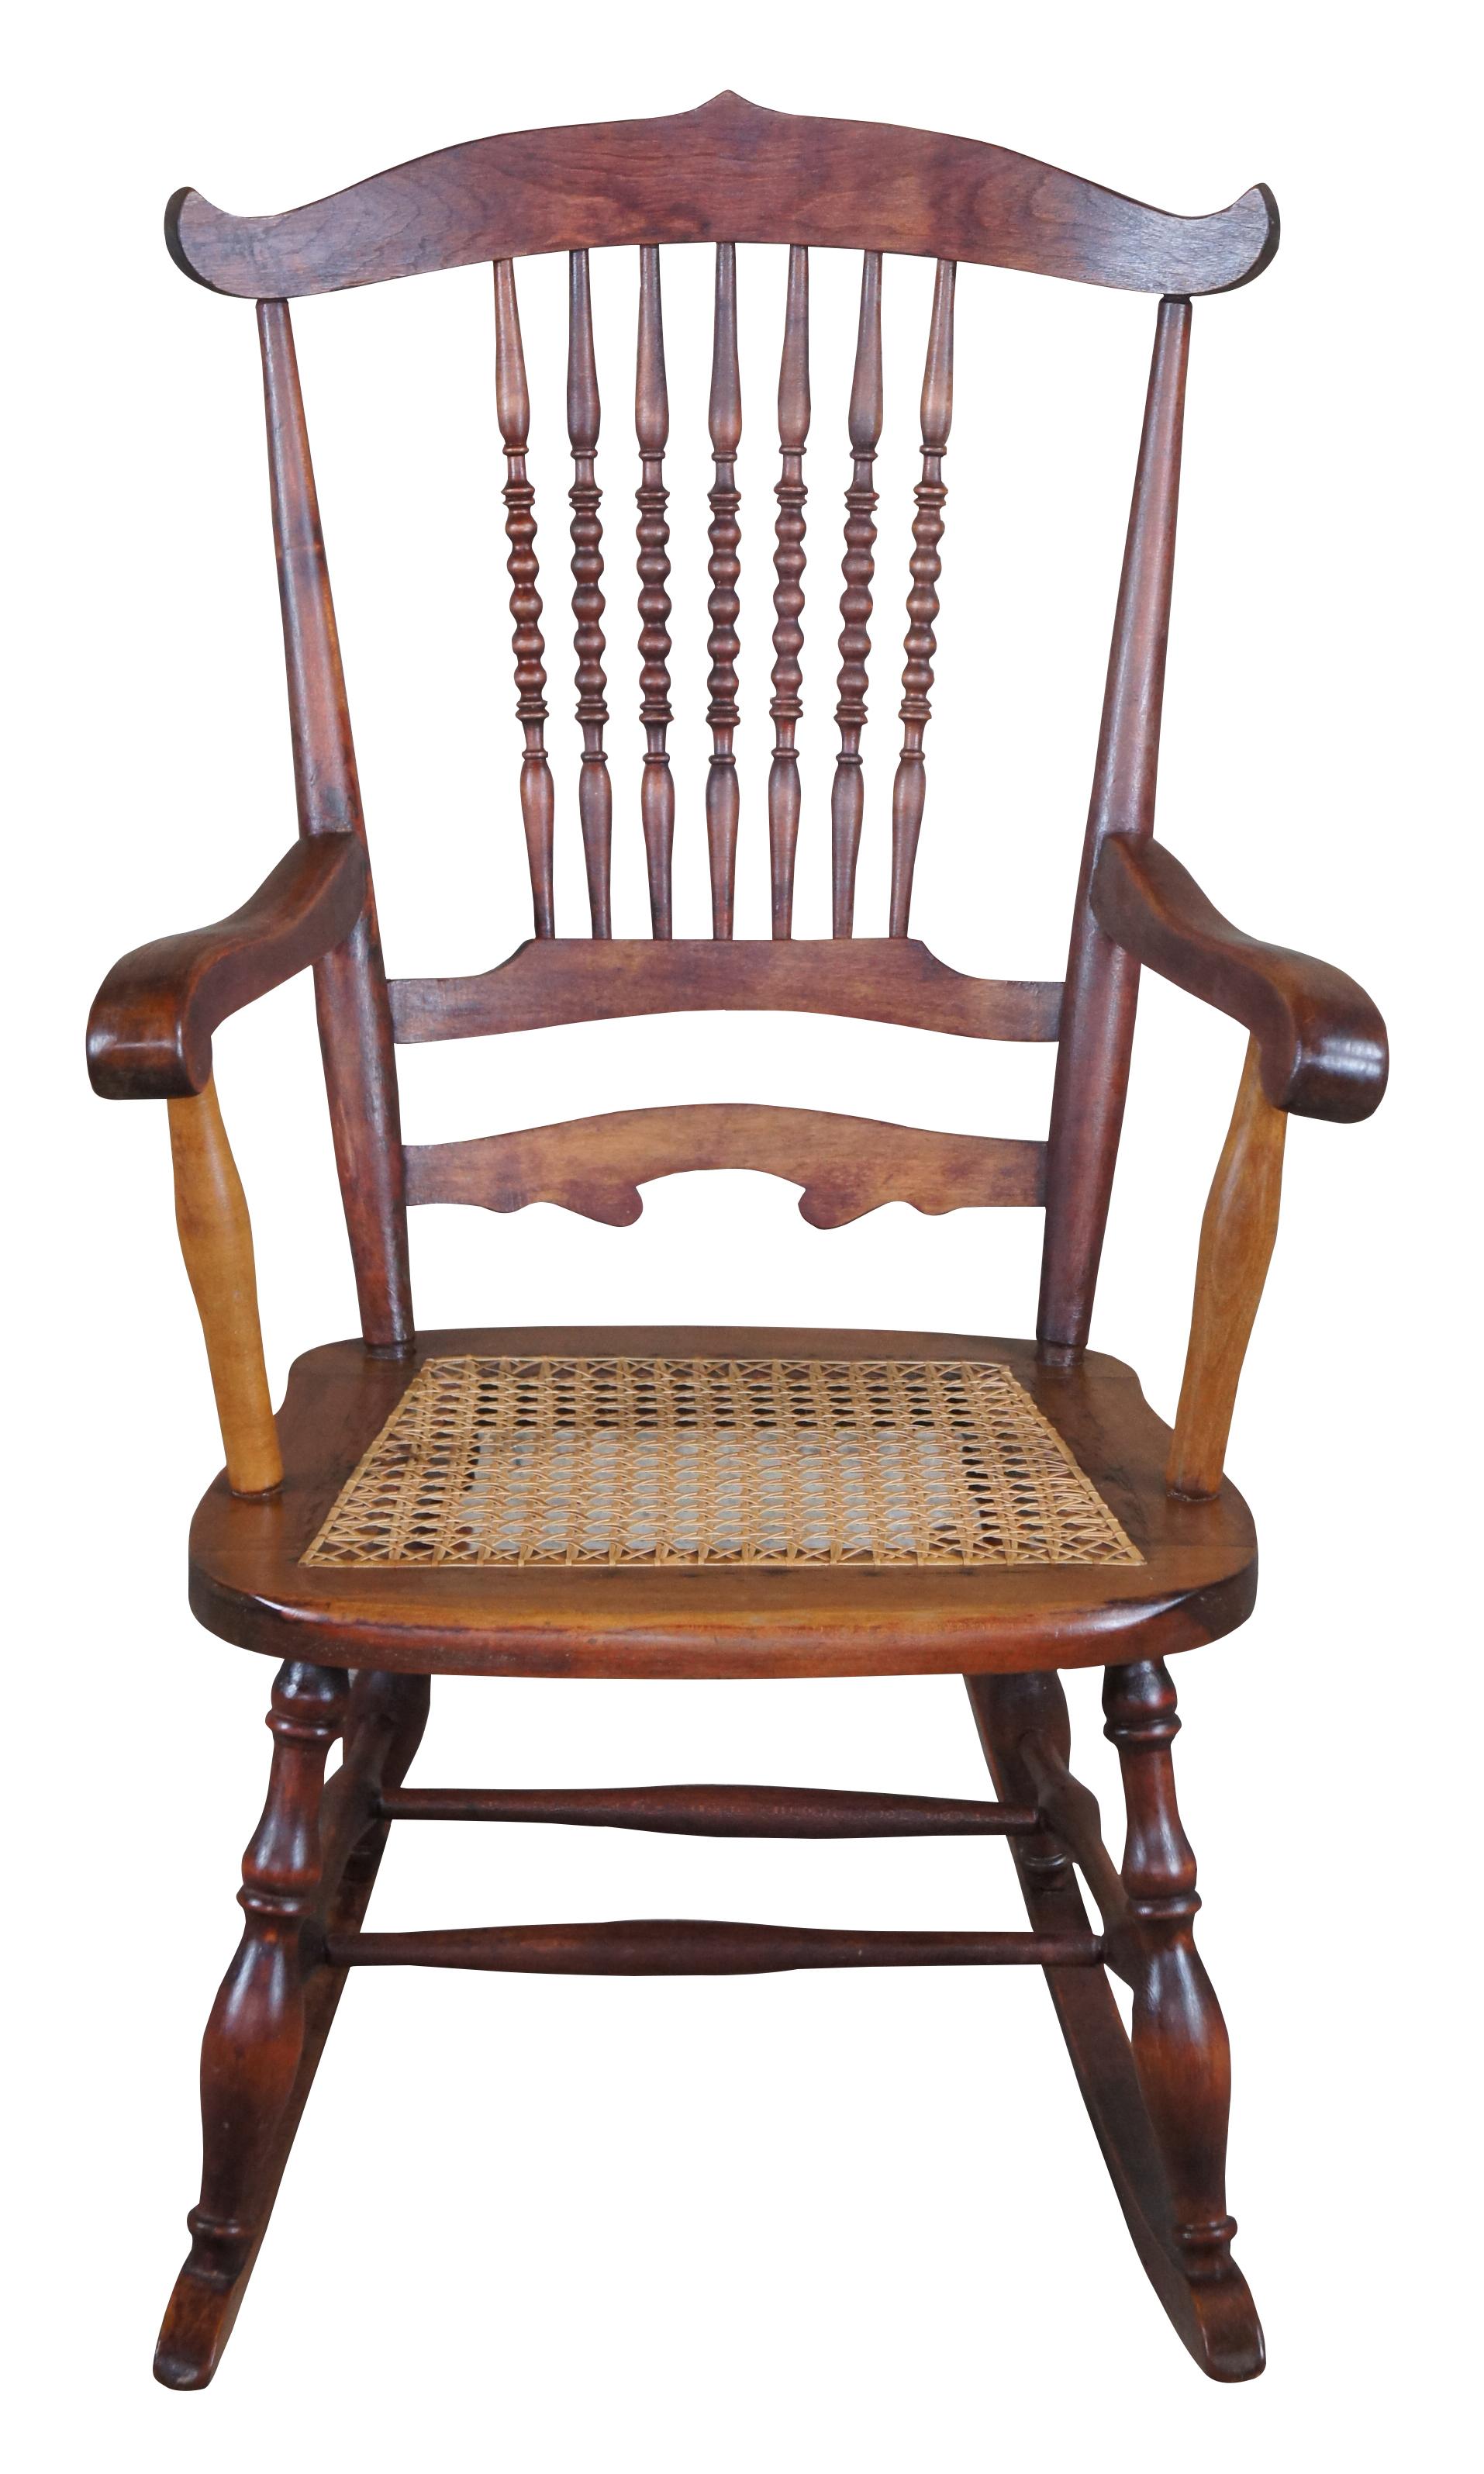 Early 20th century spindle back rocking chair. Made from maple with a shaped crest rail, sausage turned spindles and caned seat. Lower legs are turned and connected by an H stretcher